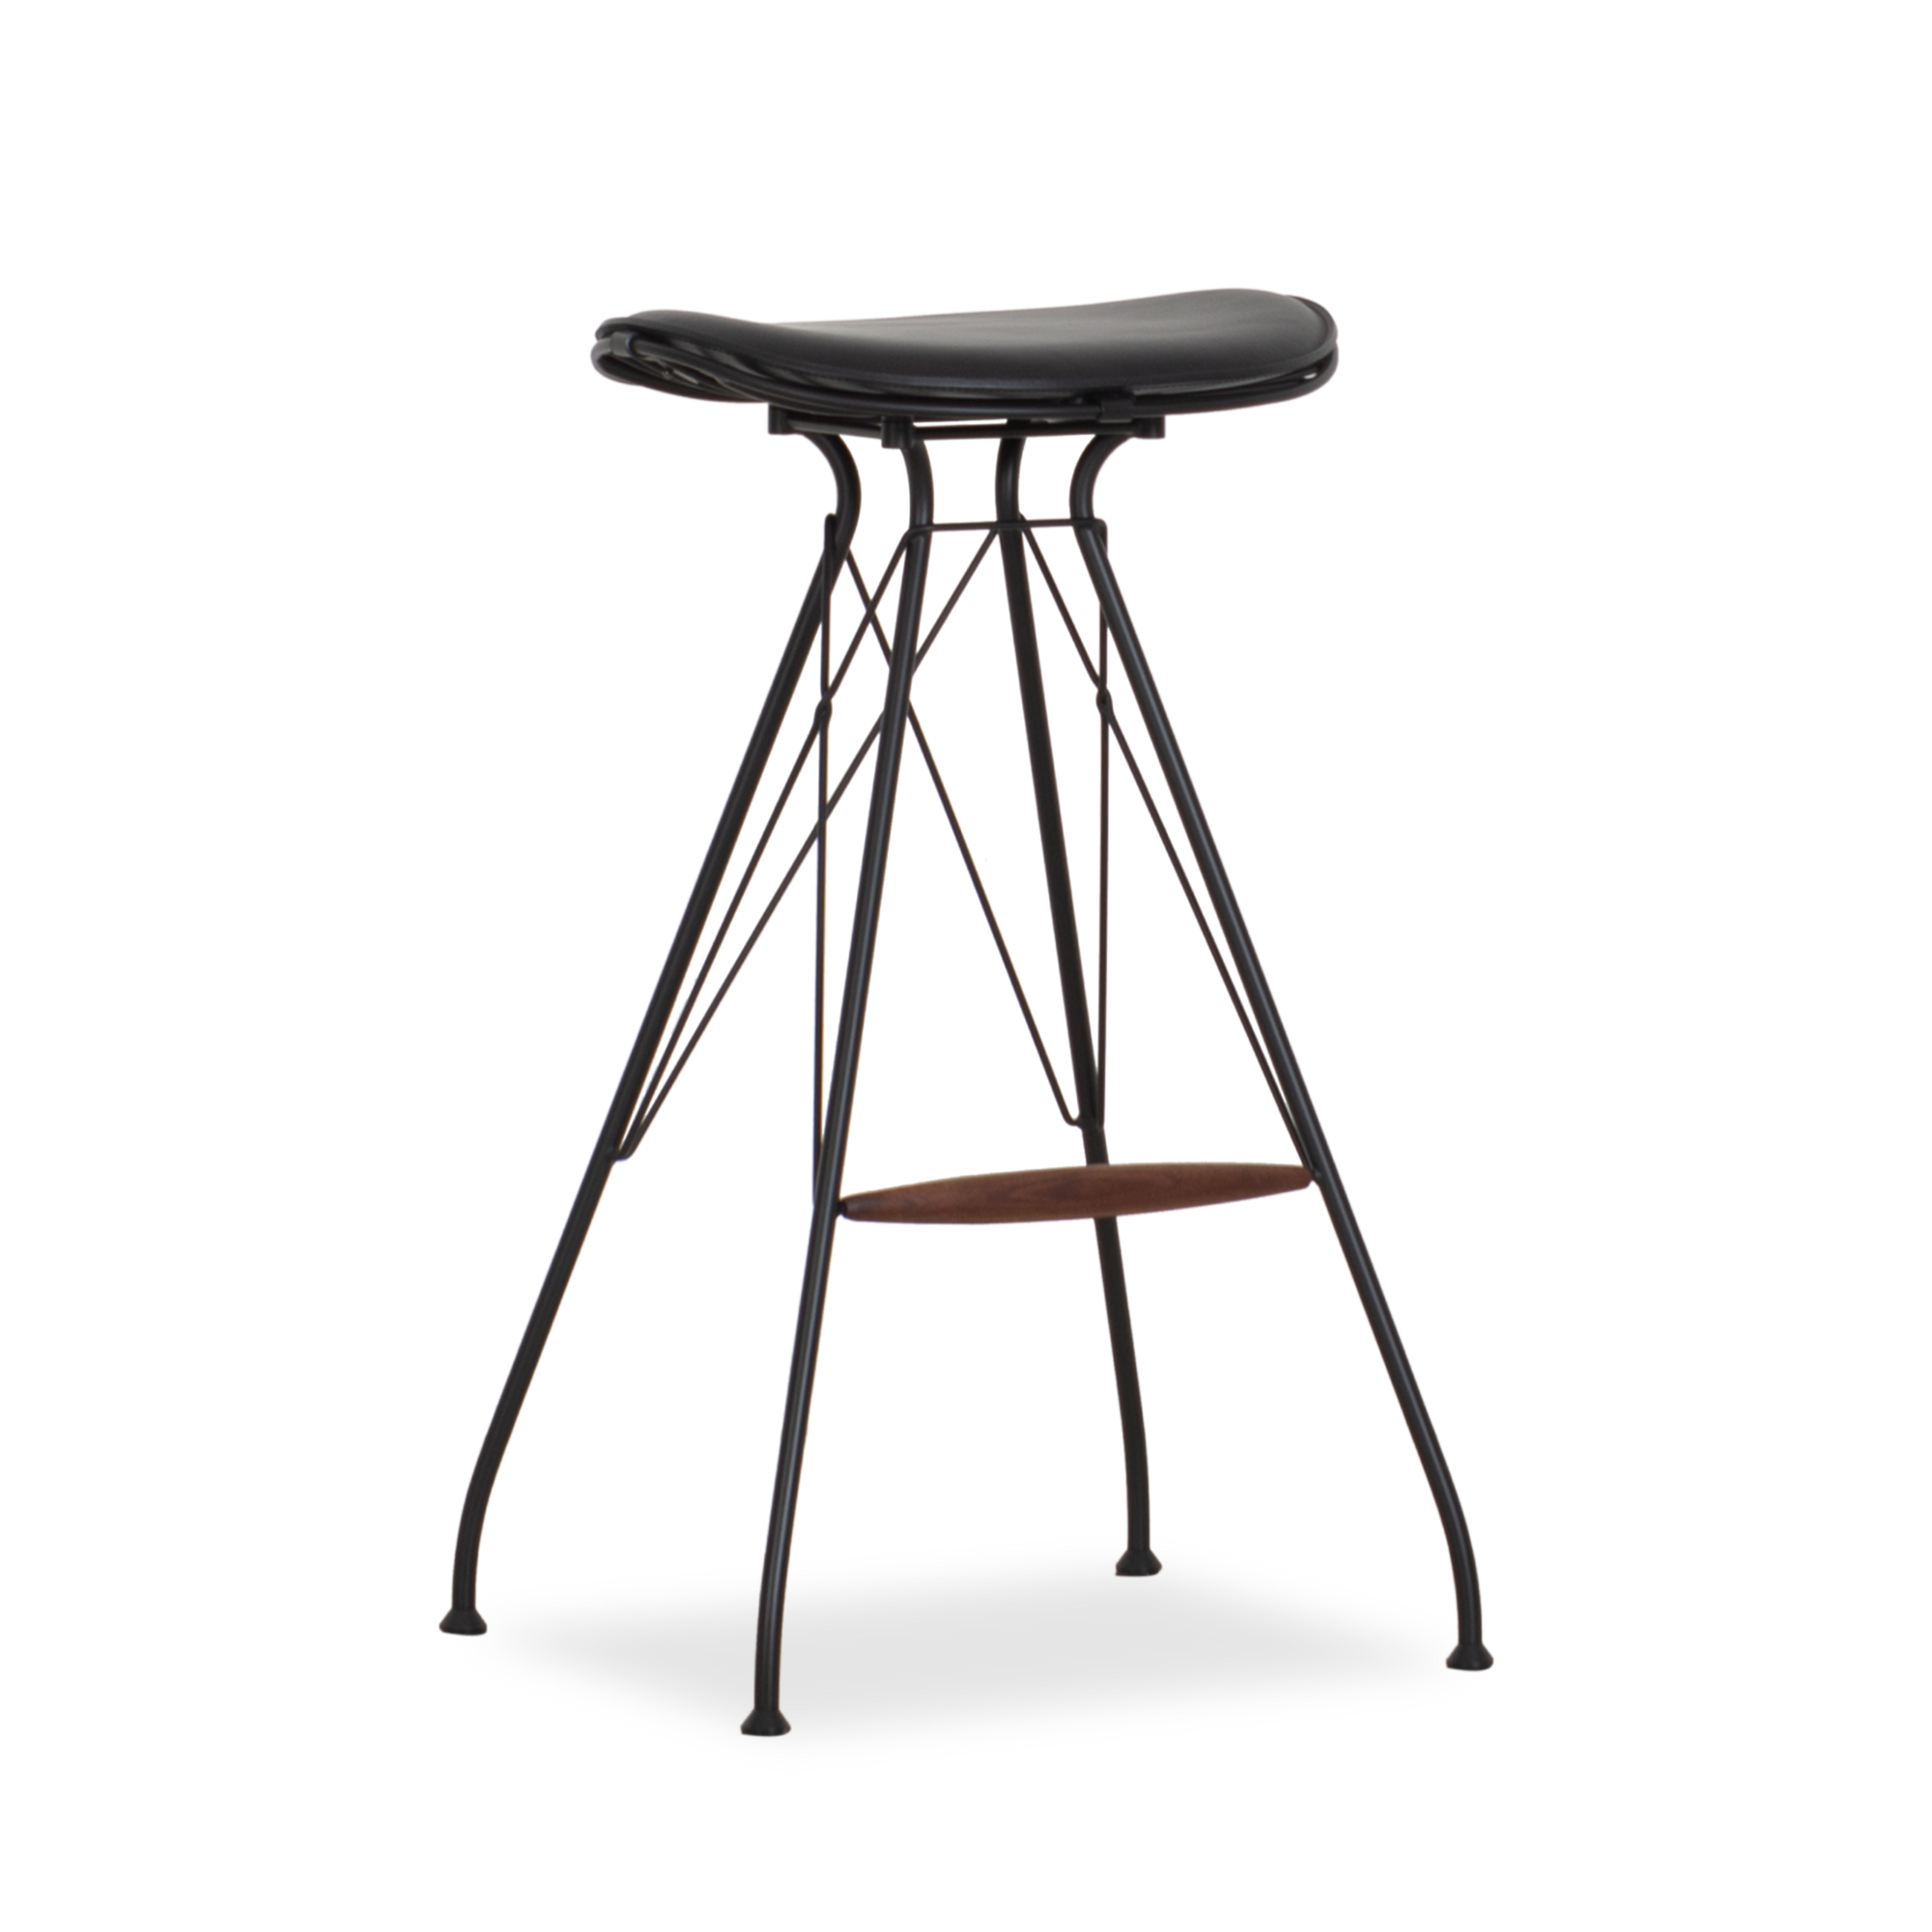 Merging abstract and minimalist design, the Wire Counter Stool was inspired by combining two traditional forms of highly-detailed and skilled craftsmanship - saddle-making and prec